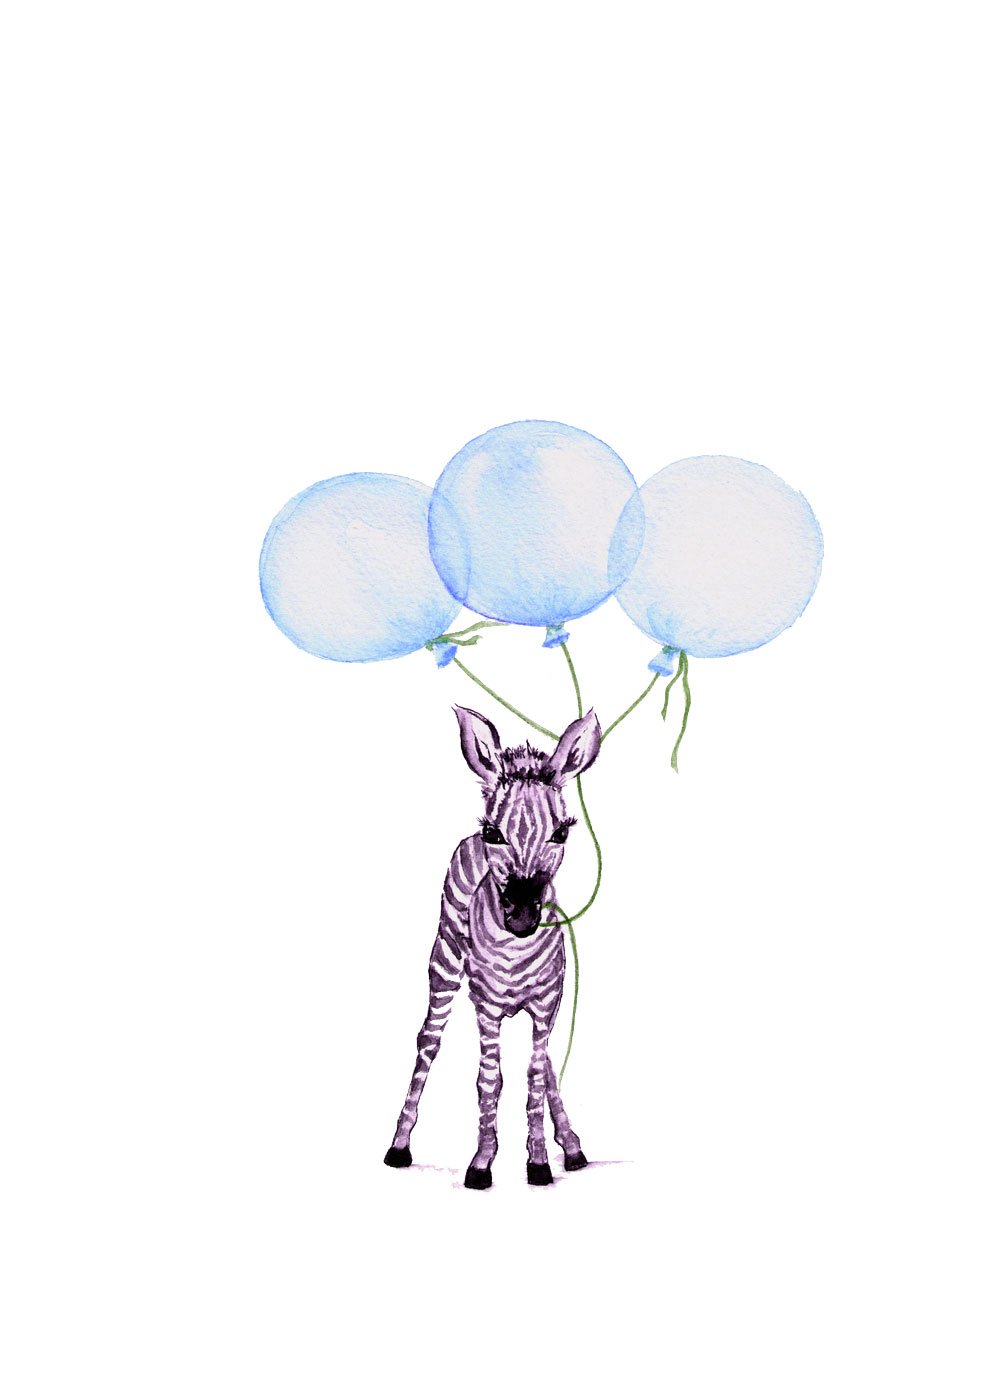 Image of Baby Zebra with Blue Balloons - From the CityLife Collection